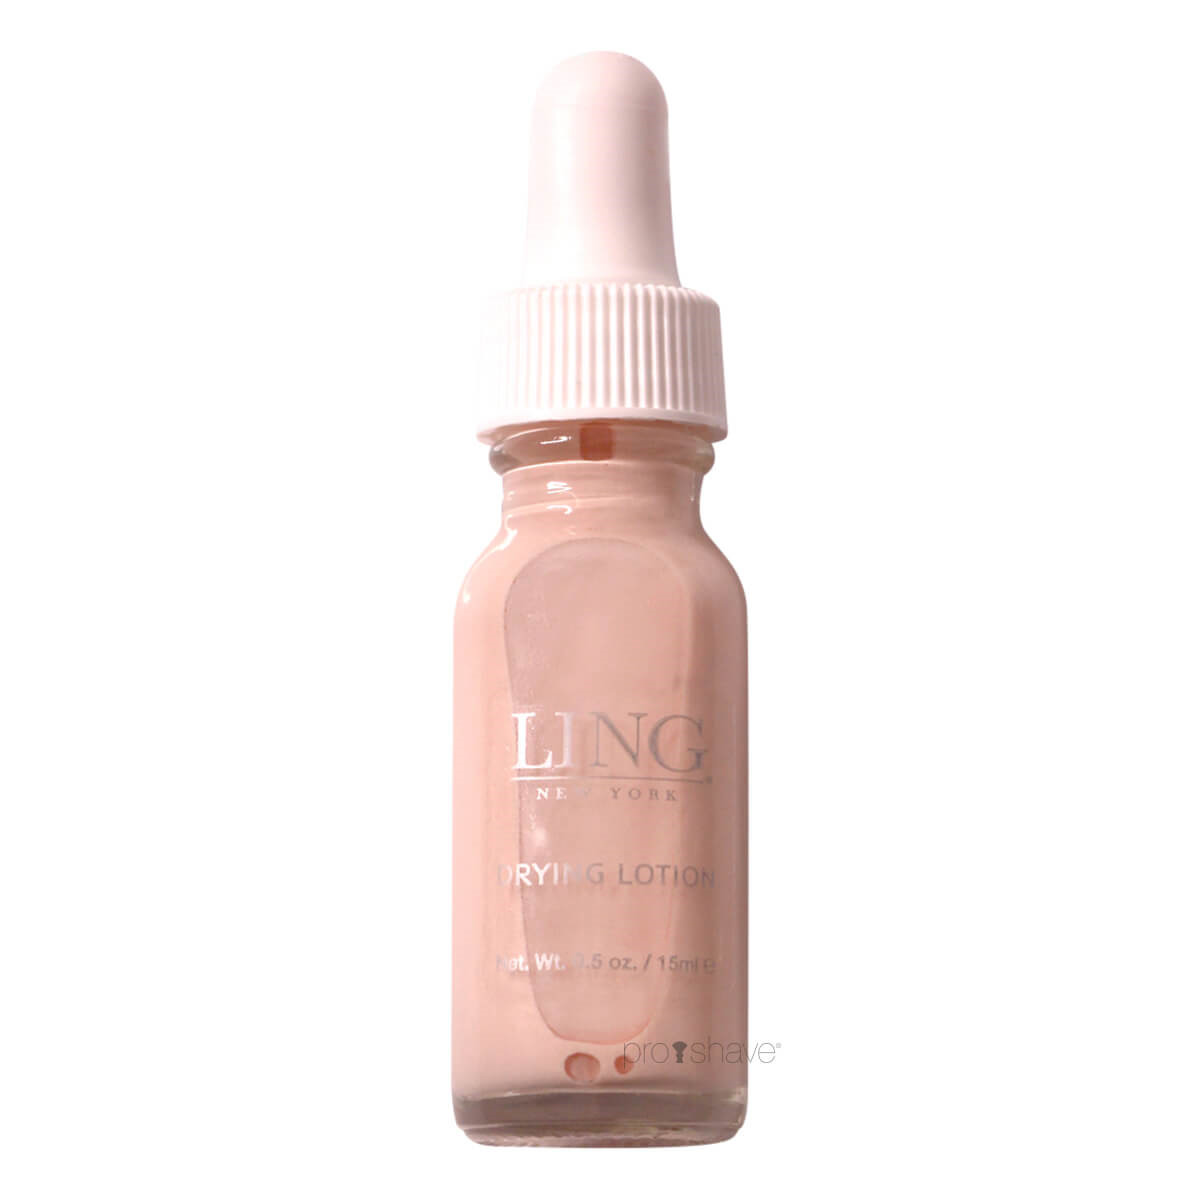 Ling New York Drying Lotion, Pimple zapper, 15 ml.